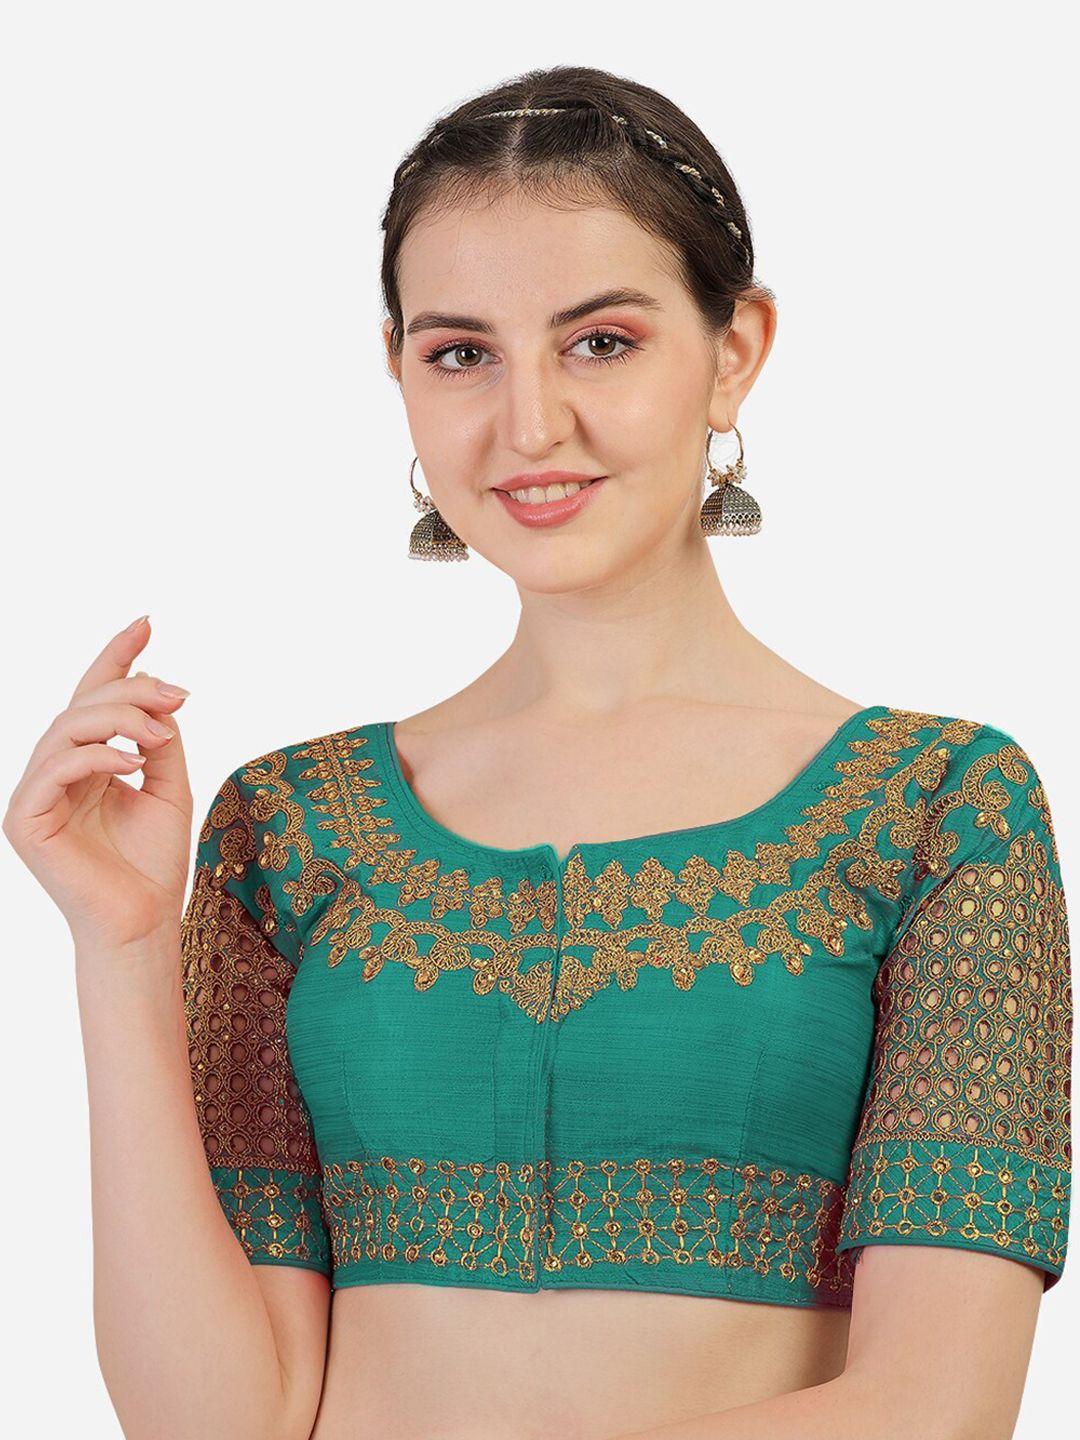 pujia-mills-teal-green-&-gold-toned-embellished-saree-blouse